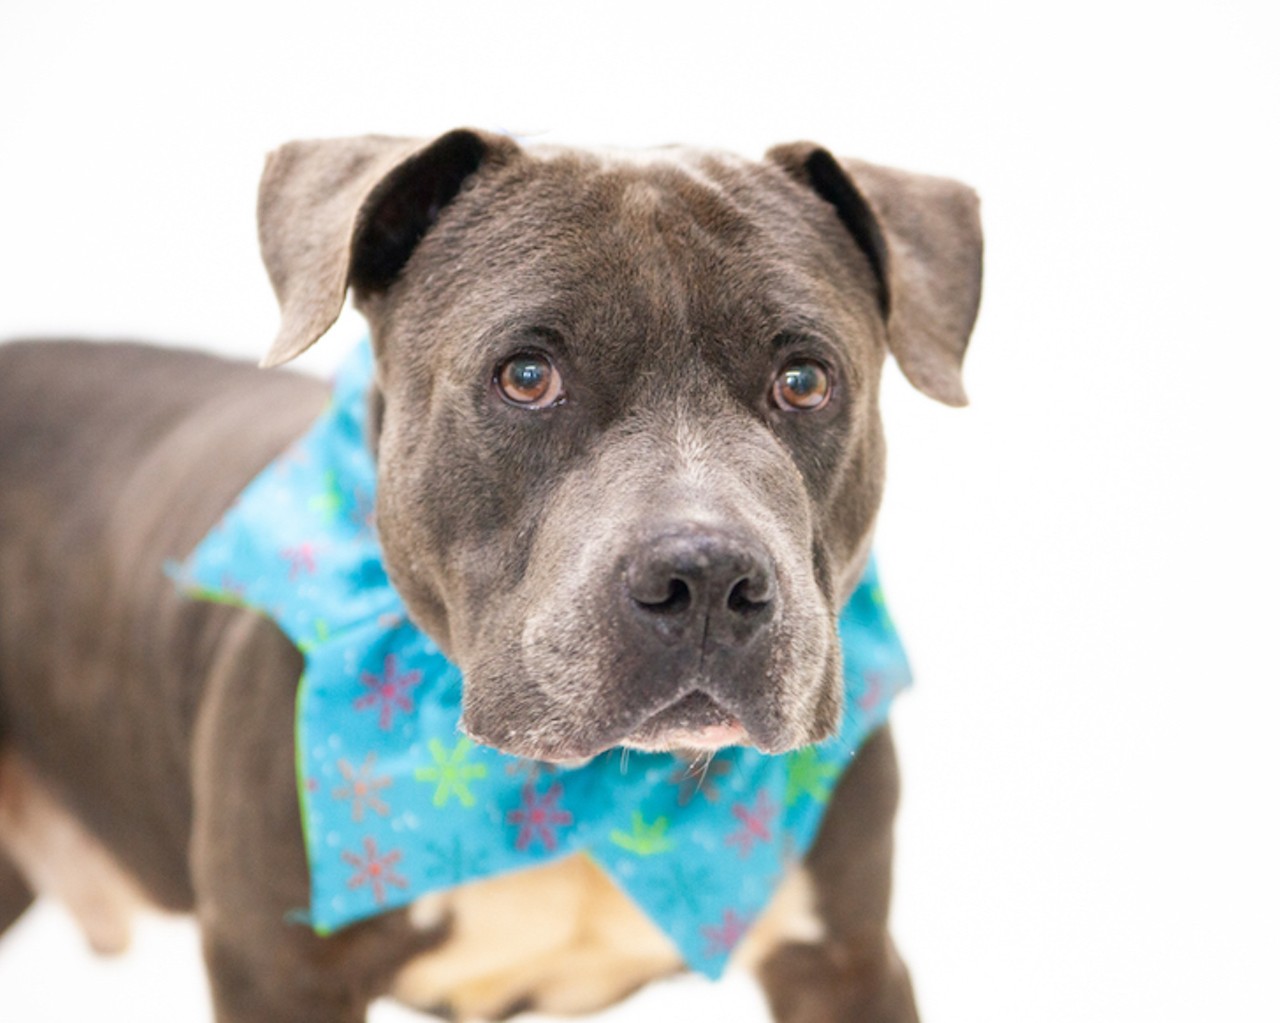 Adoptable dogs in Orange County who need your hugs and a home